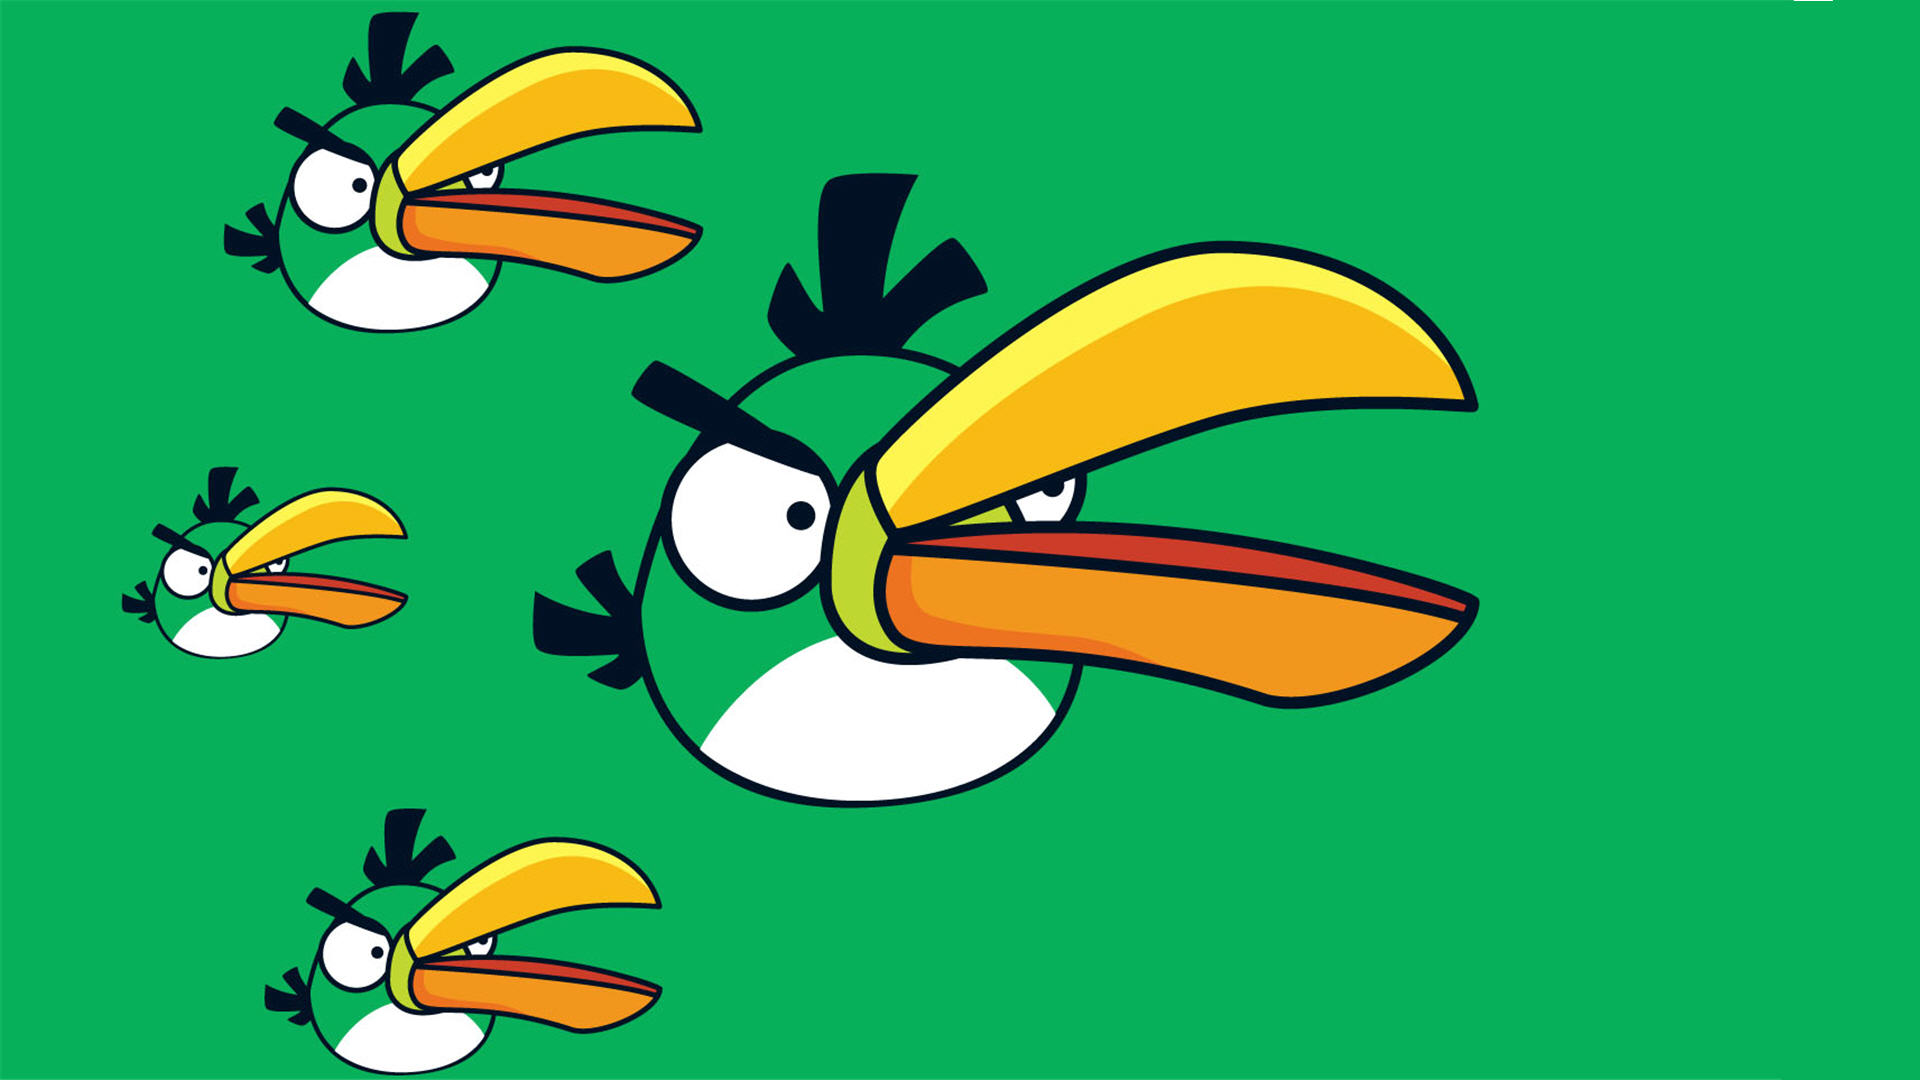 Download Green Angry Birds Wallpaper 3203 1920x1080 px High ...